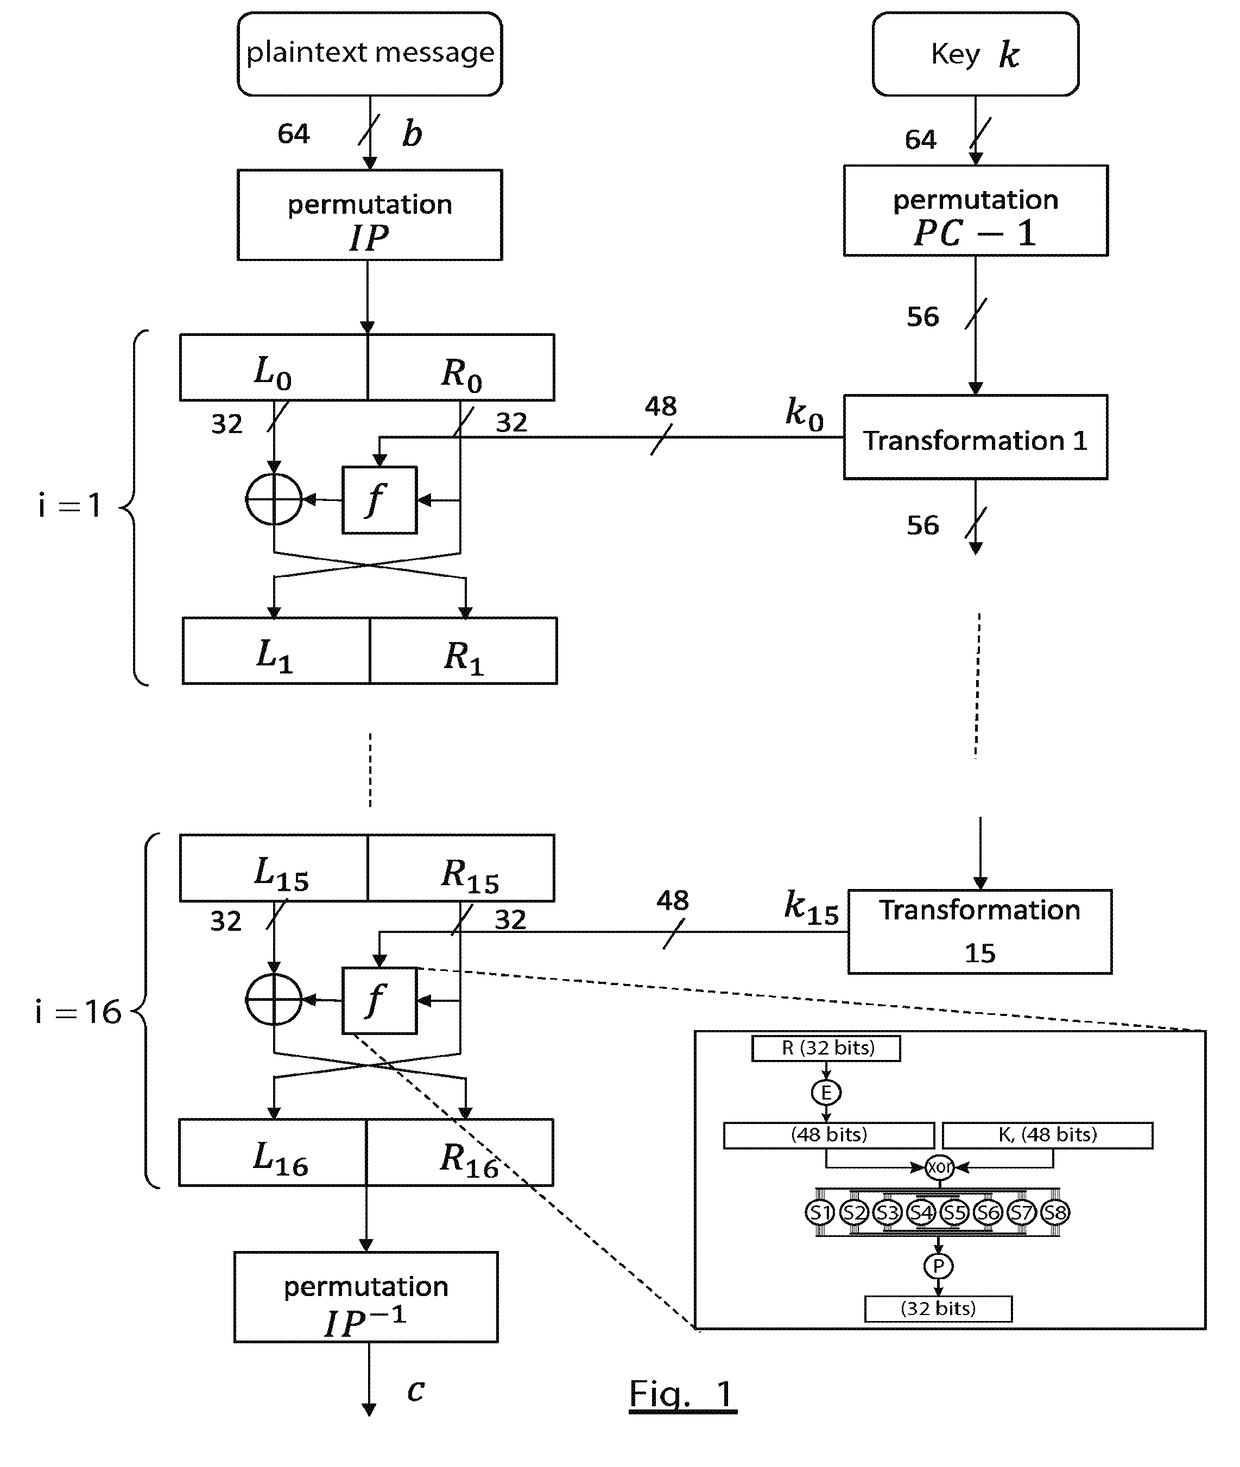 Method of encryption with dynamic diffusion and confusion layers